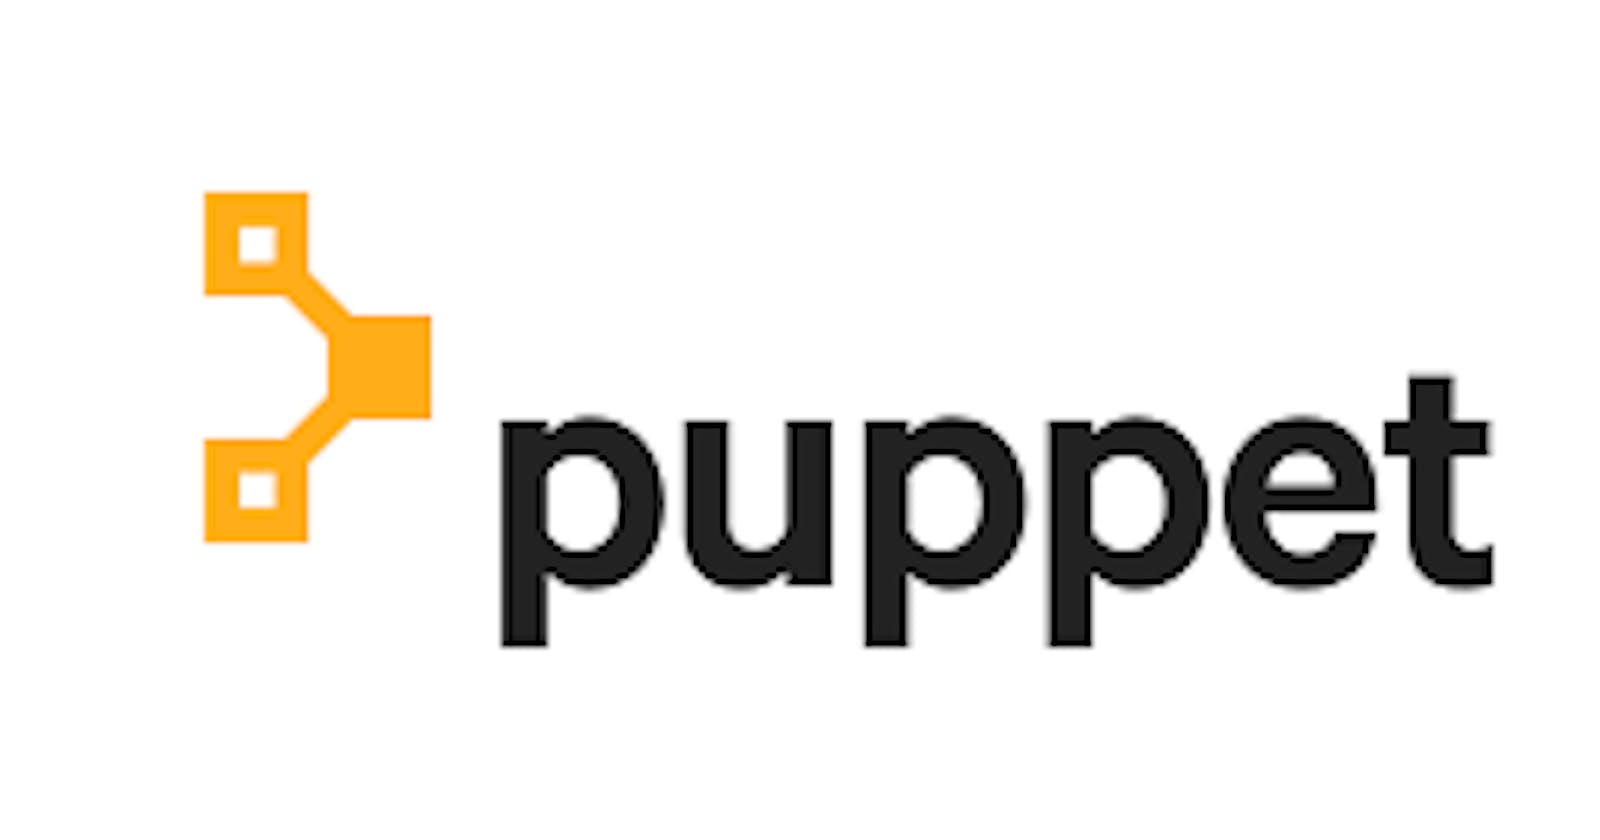 Alternative to Chef and Ansible - The Puppet